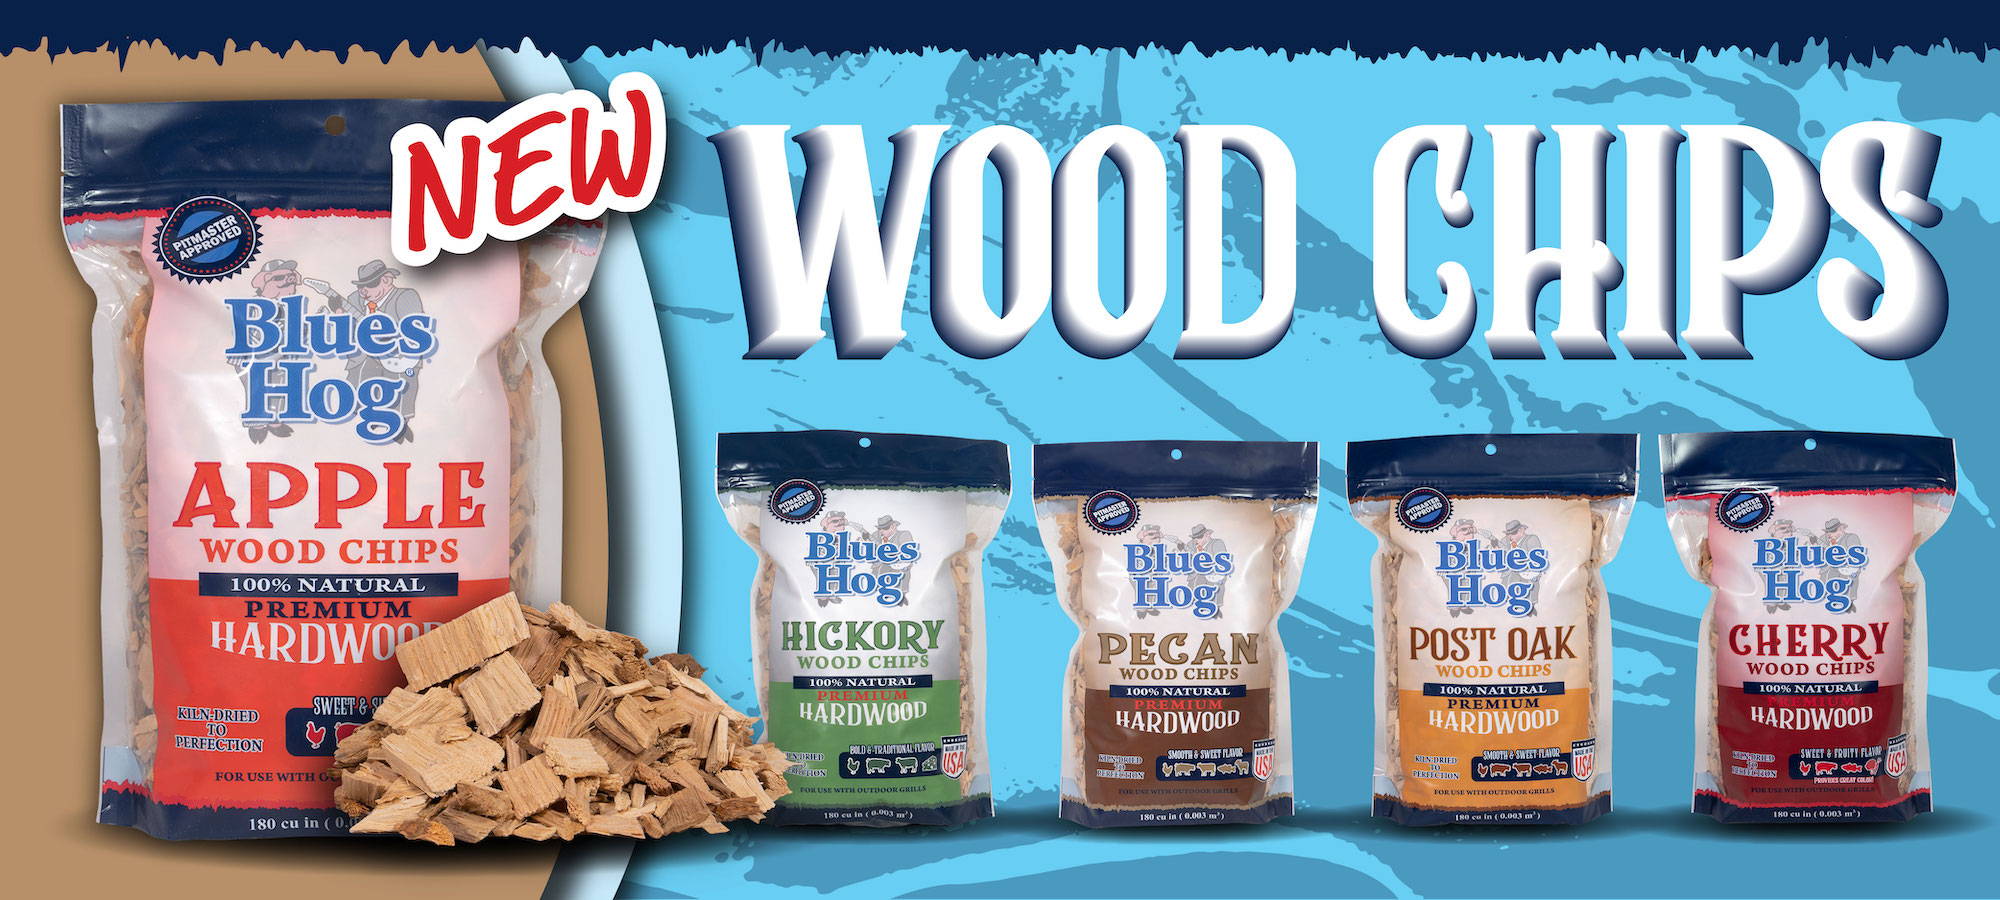 Wood Chips Ad